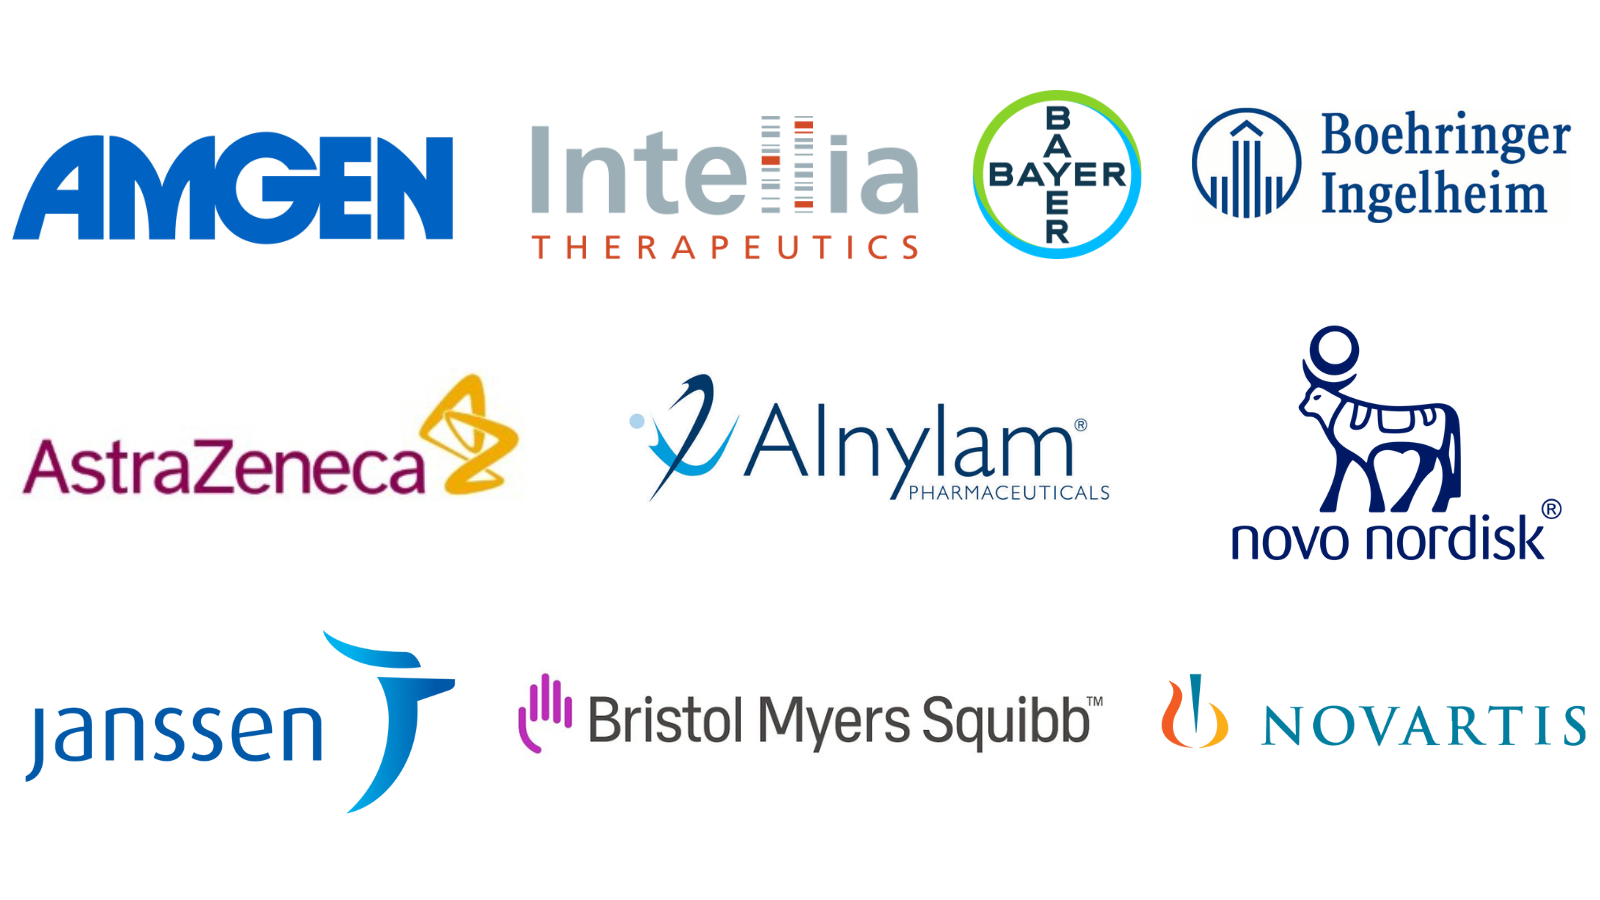 This graphic shows the logos of the companies serving on the Think Tanks Advisory Board. They include: Amgen, Intellia Therapeutics, Bayer, Boehringer Ingelheim, AstraZeneca, Alnylam, Novo Nordisk, Janssen, Bristol Myers Squibb, and Novartis